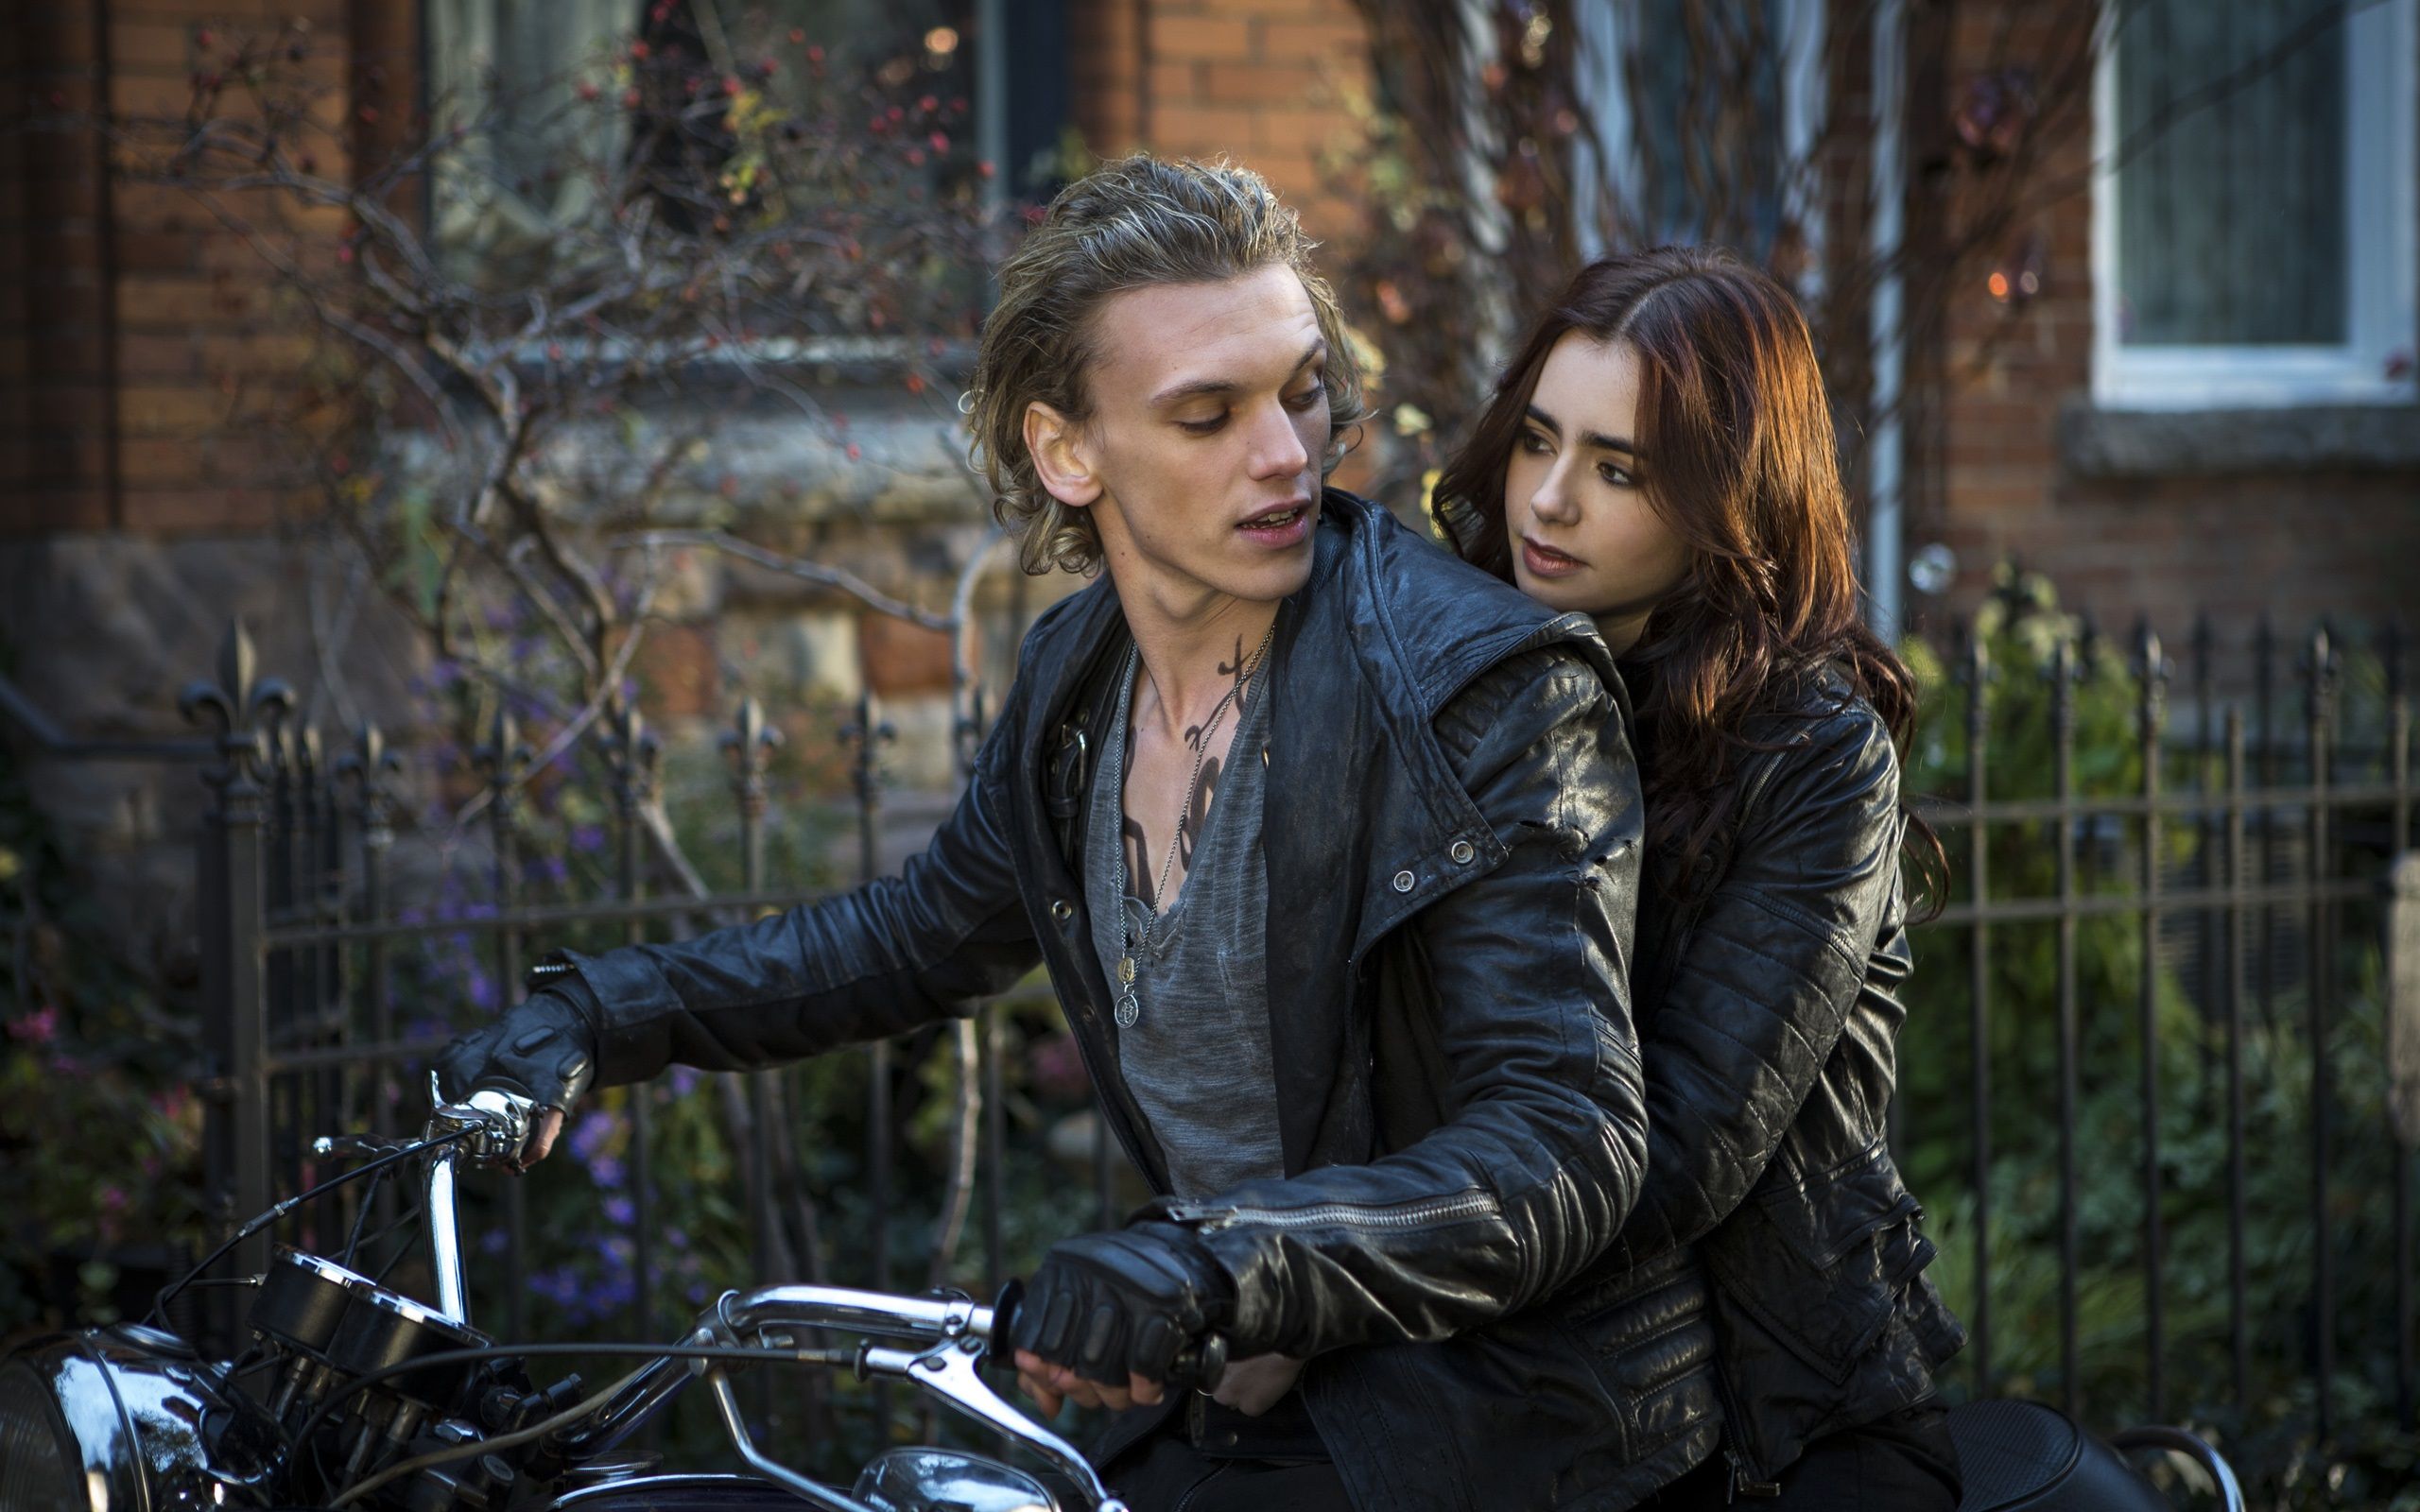 Wallpaper The Mortal Instruments: City of Bones, Lily Collins, Jamie Campbell Bower 2560x1600 HD Picture, Image